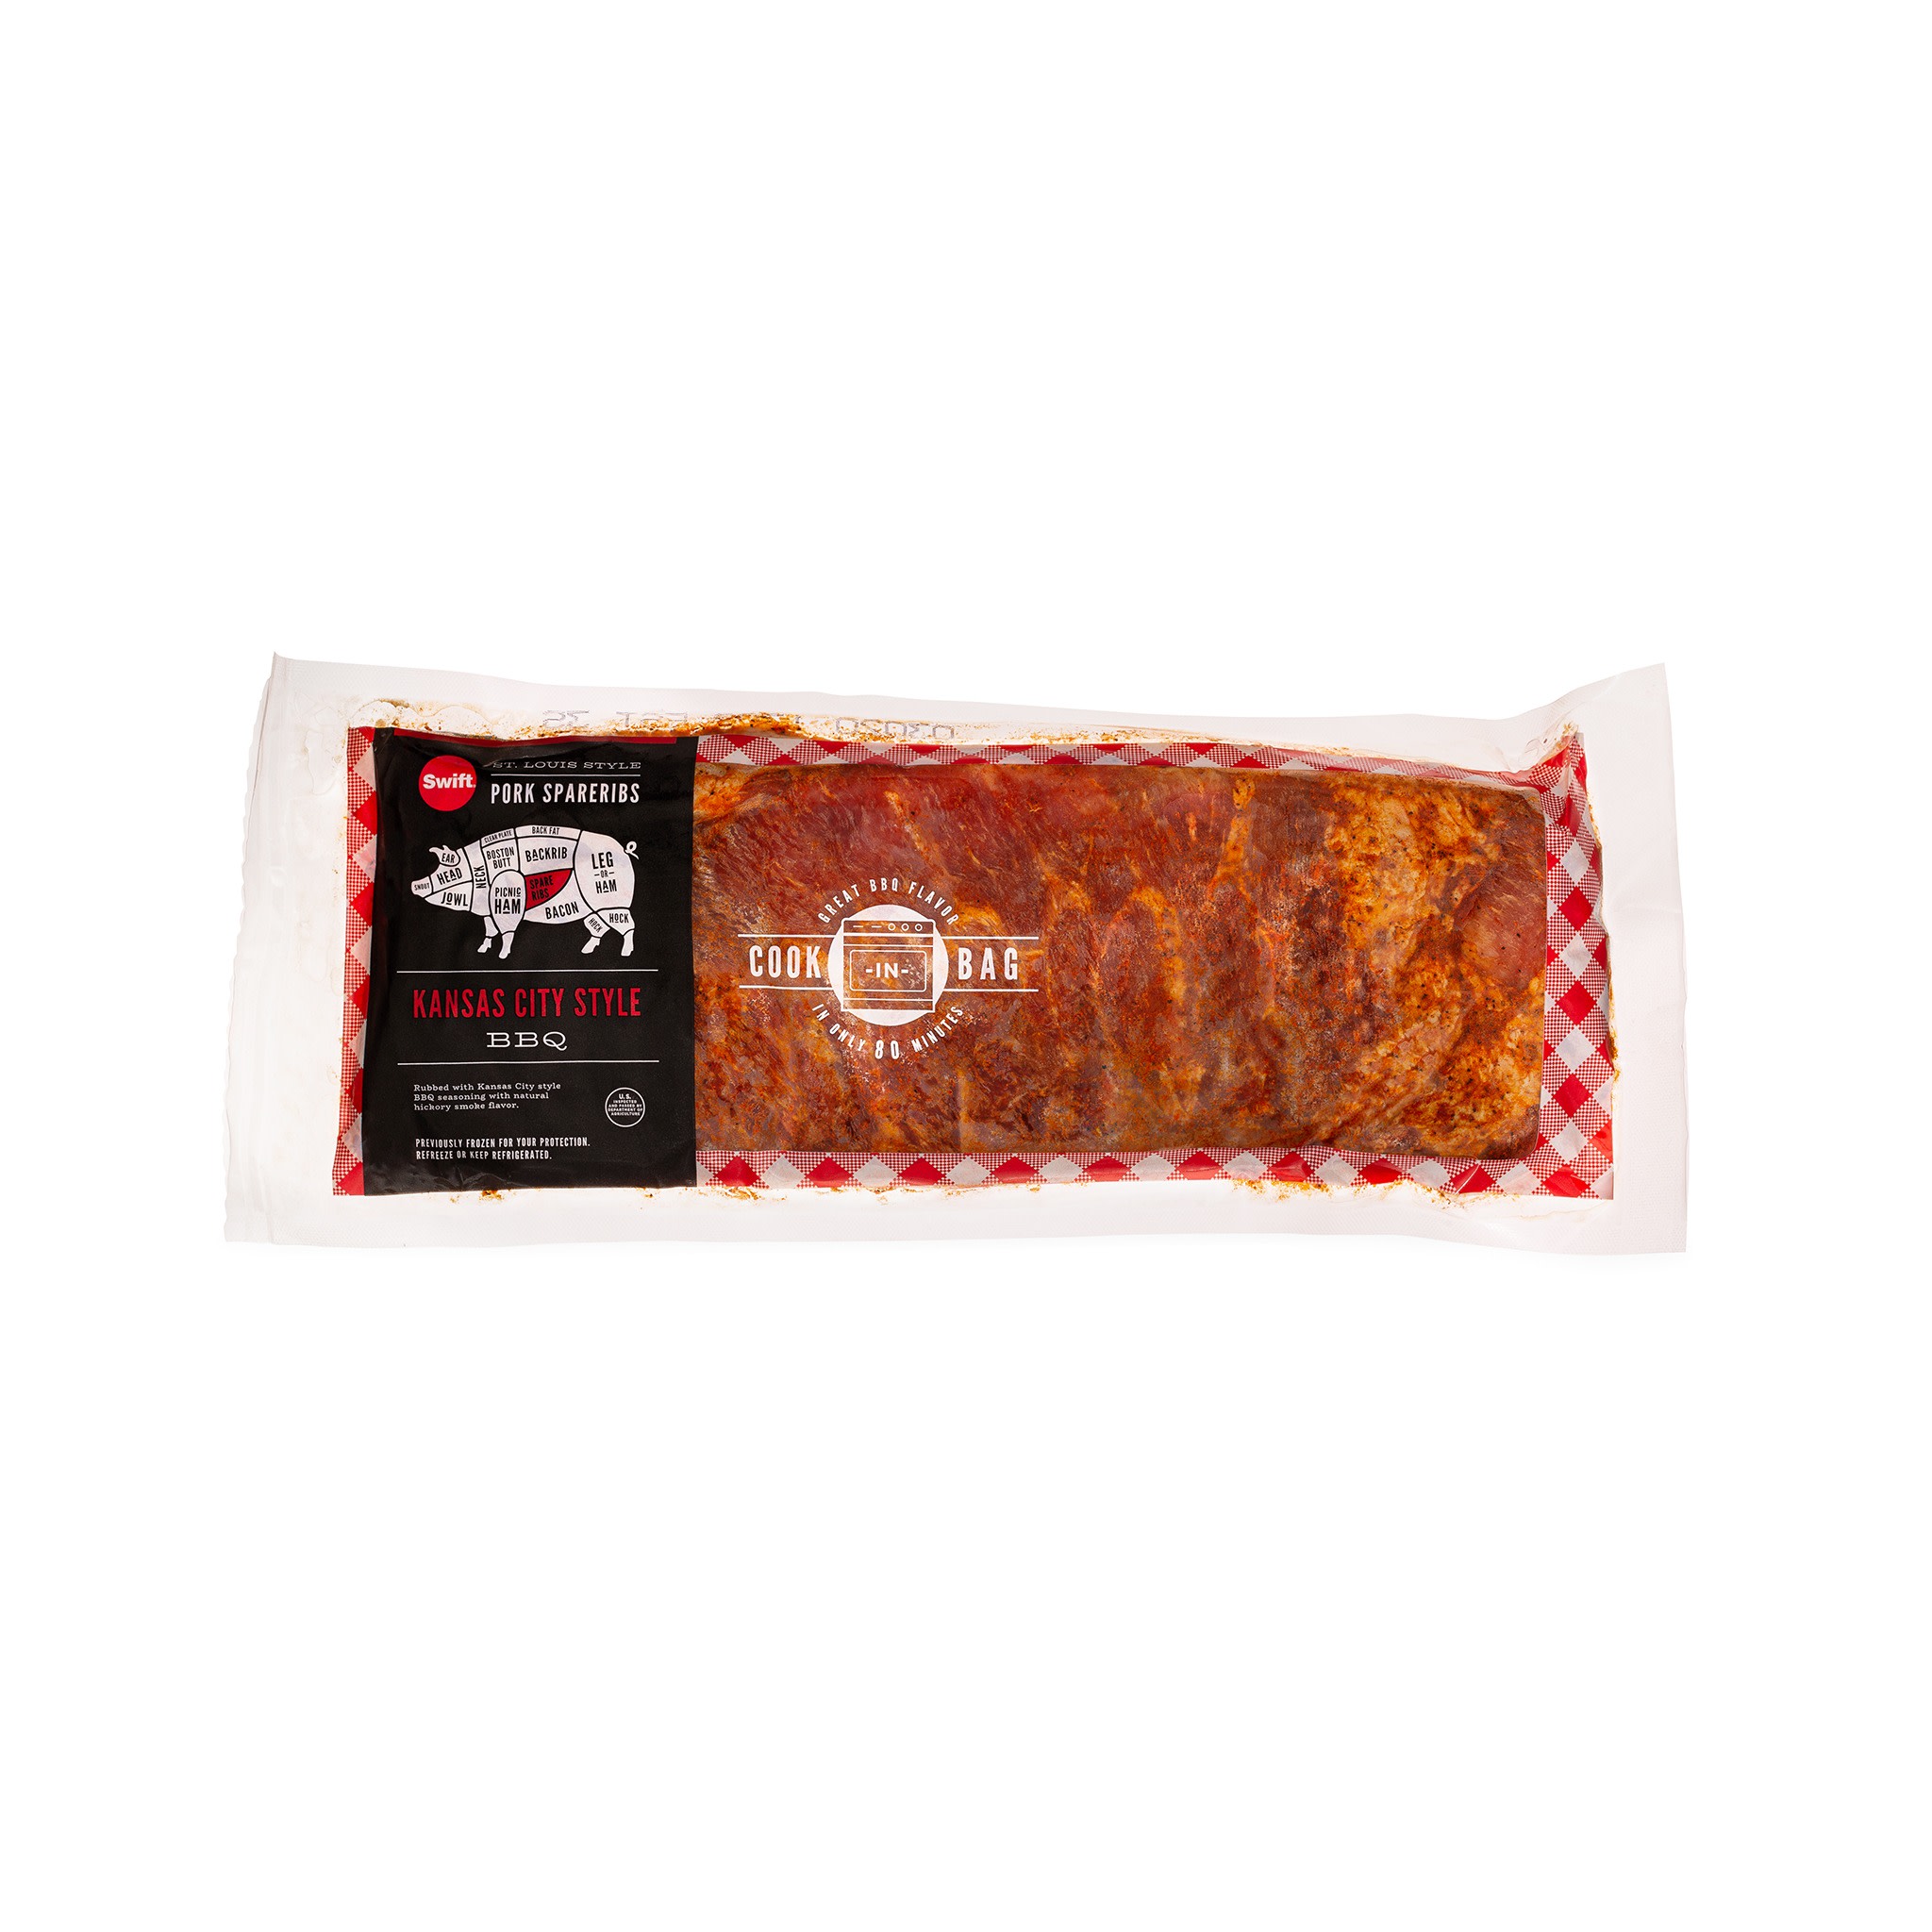 3602 WF PACKAGED St. Louis Ribs Kansas City-Style (Cook-In-Bag) Pork